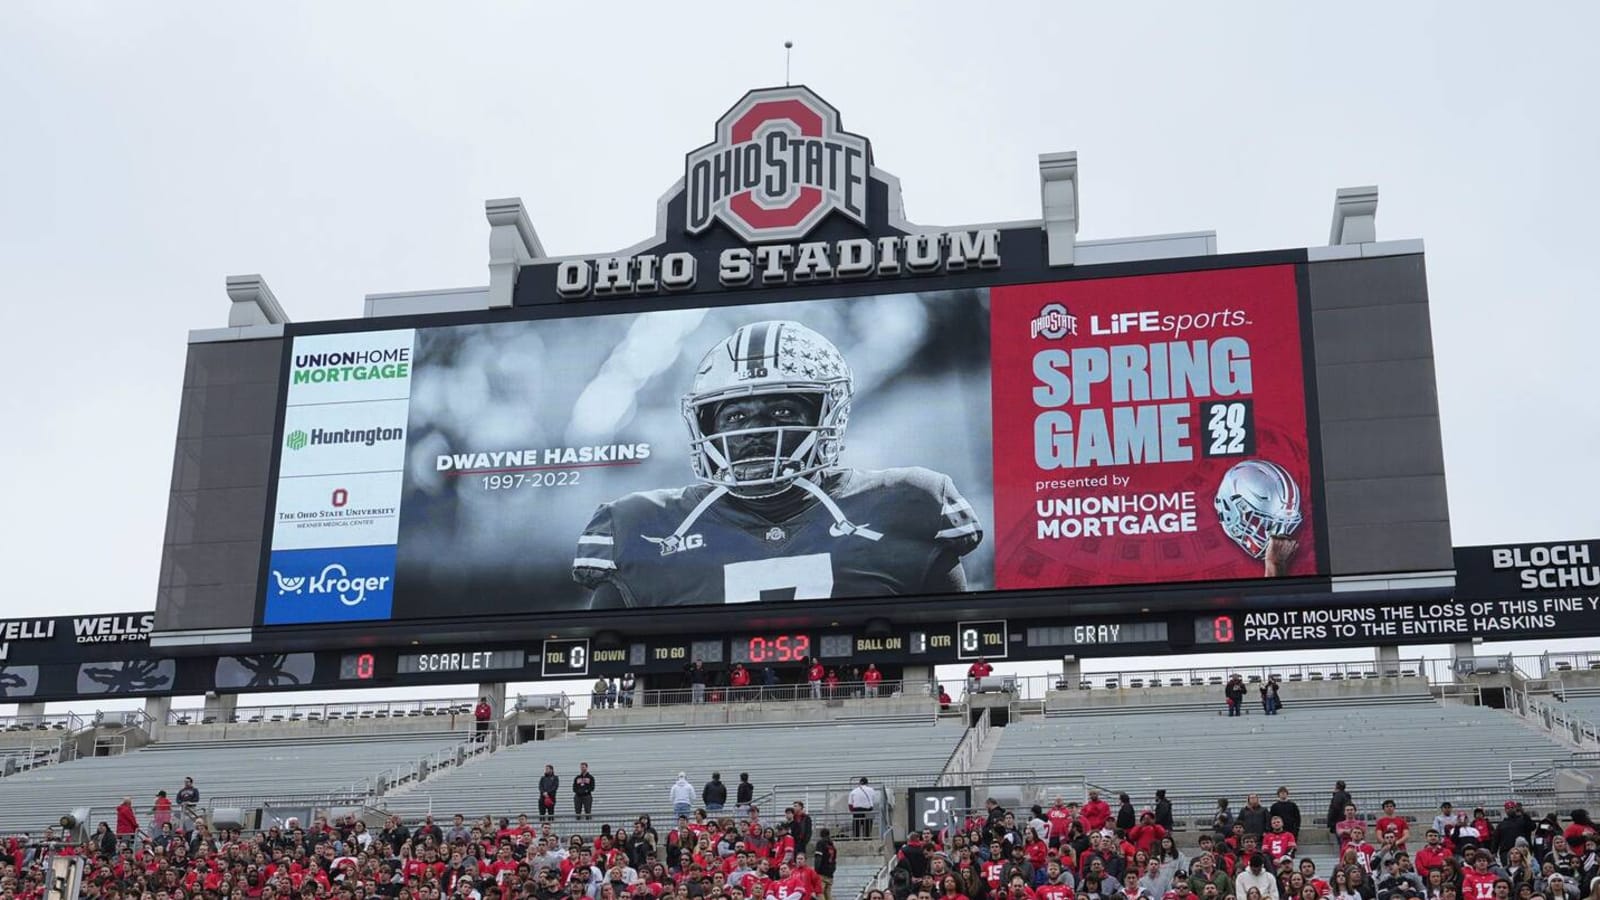 Dwayne Haskins honored during Ohio State spring game